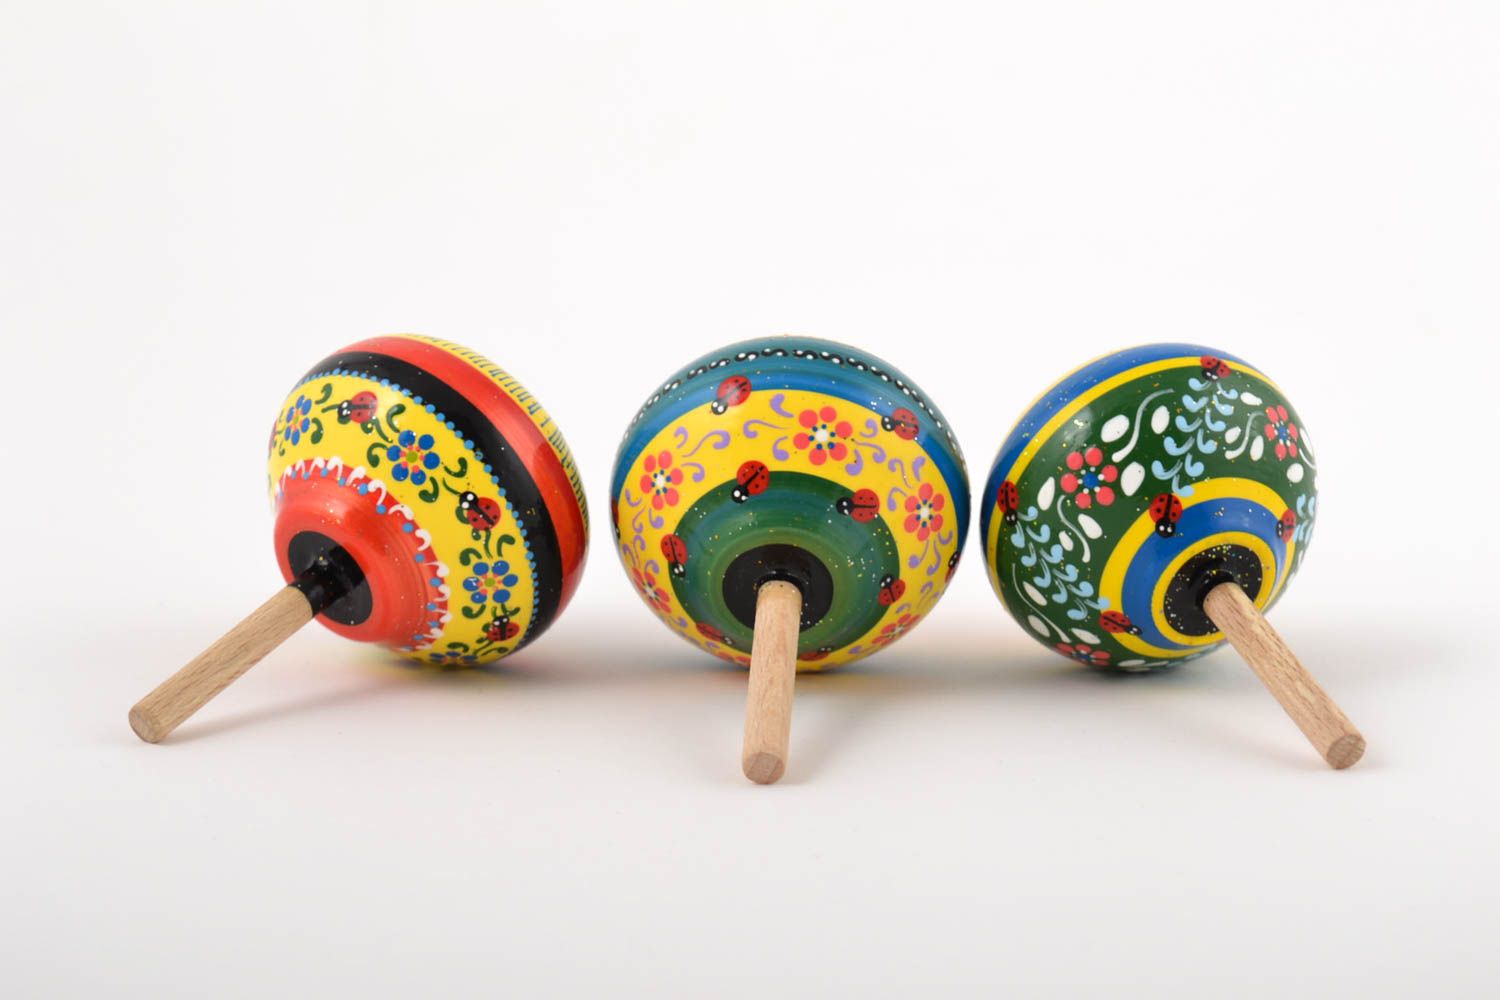 Wooden Spinning Yoyo, Mexican Toy, Handmade Toy, Handcrafted